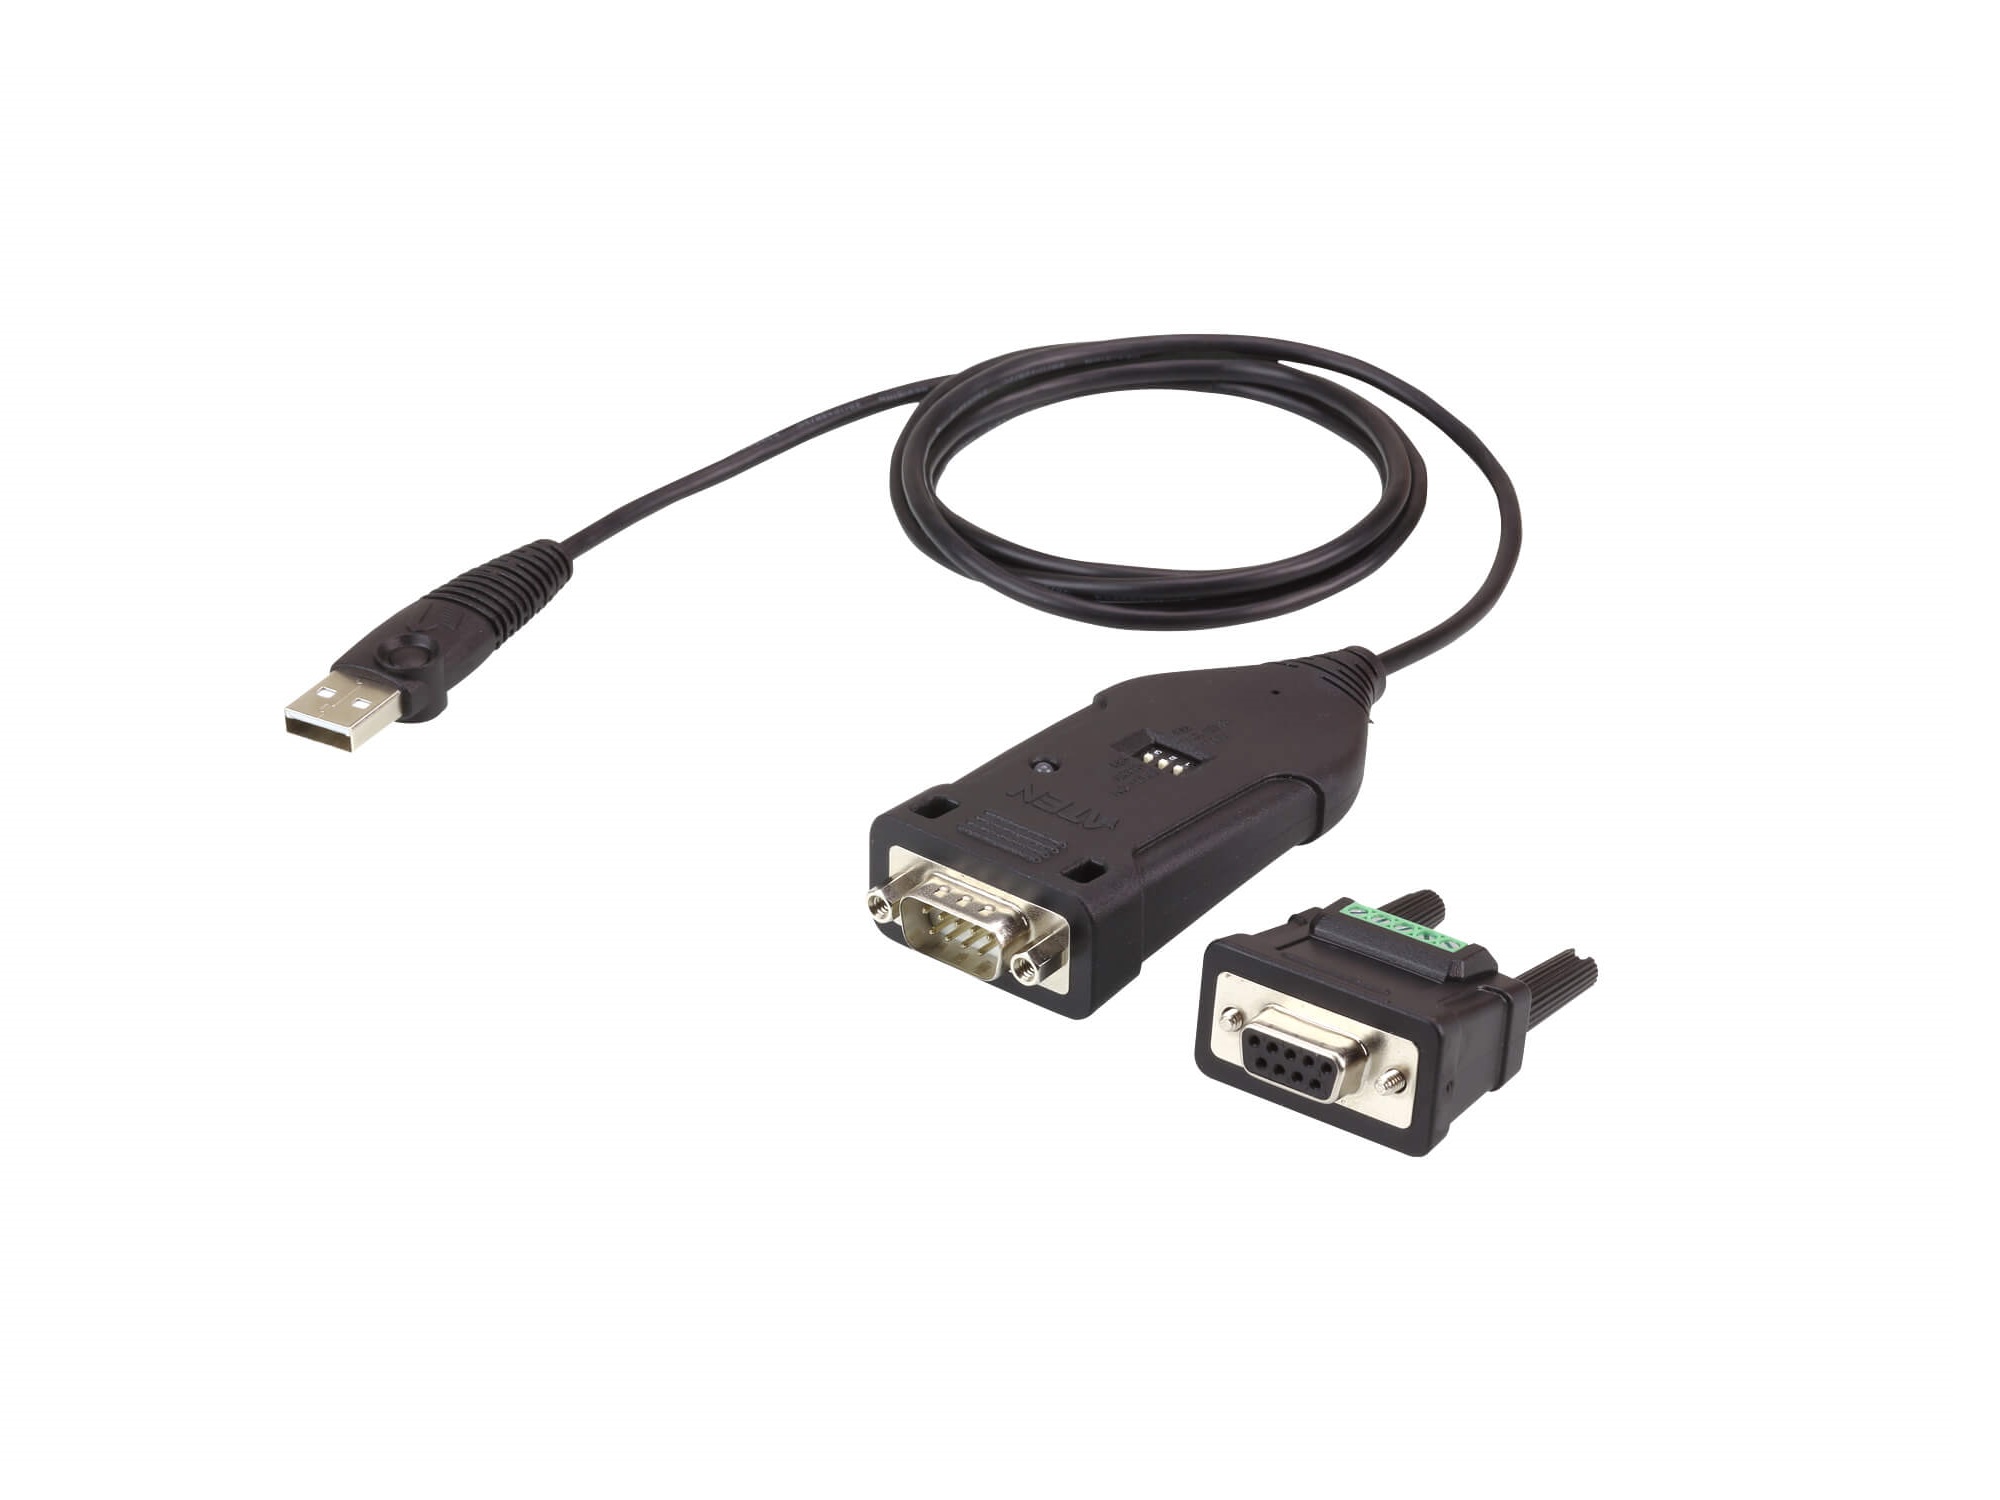 Aten UC485 USB to RS-422/485 Adapter